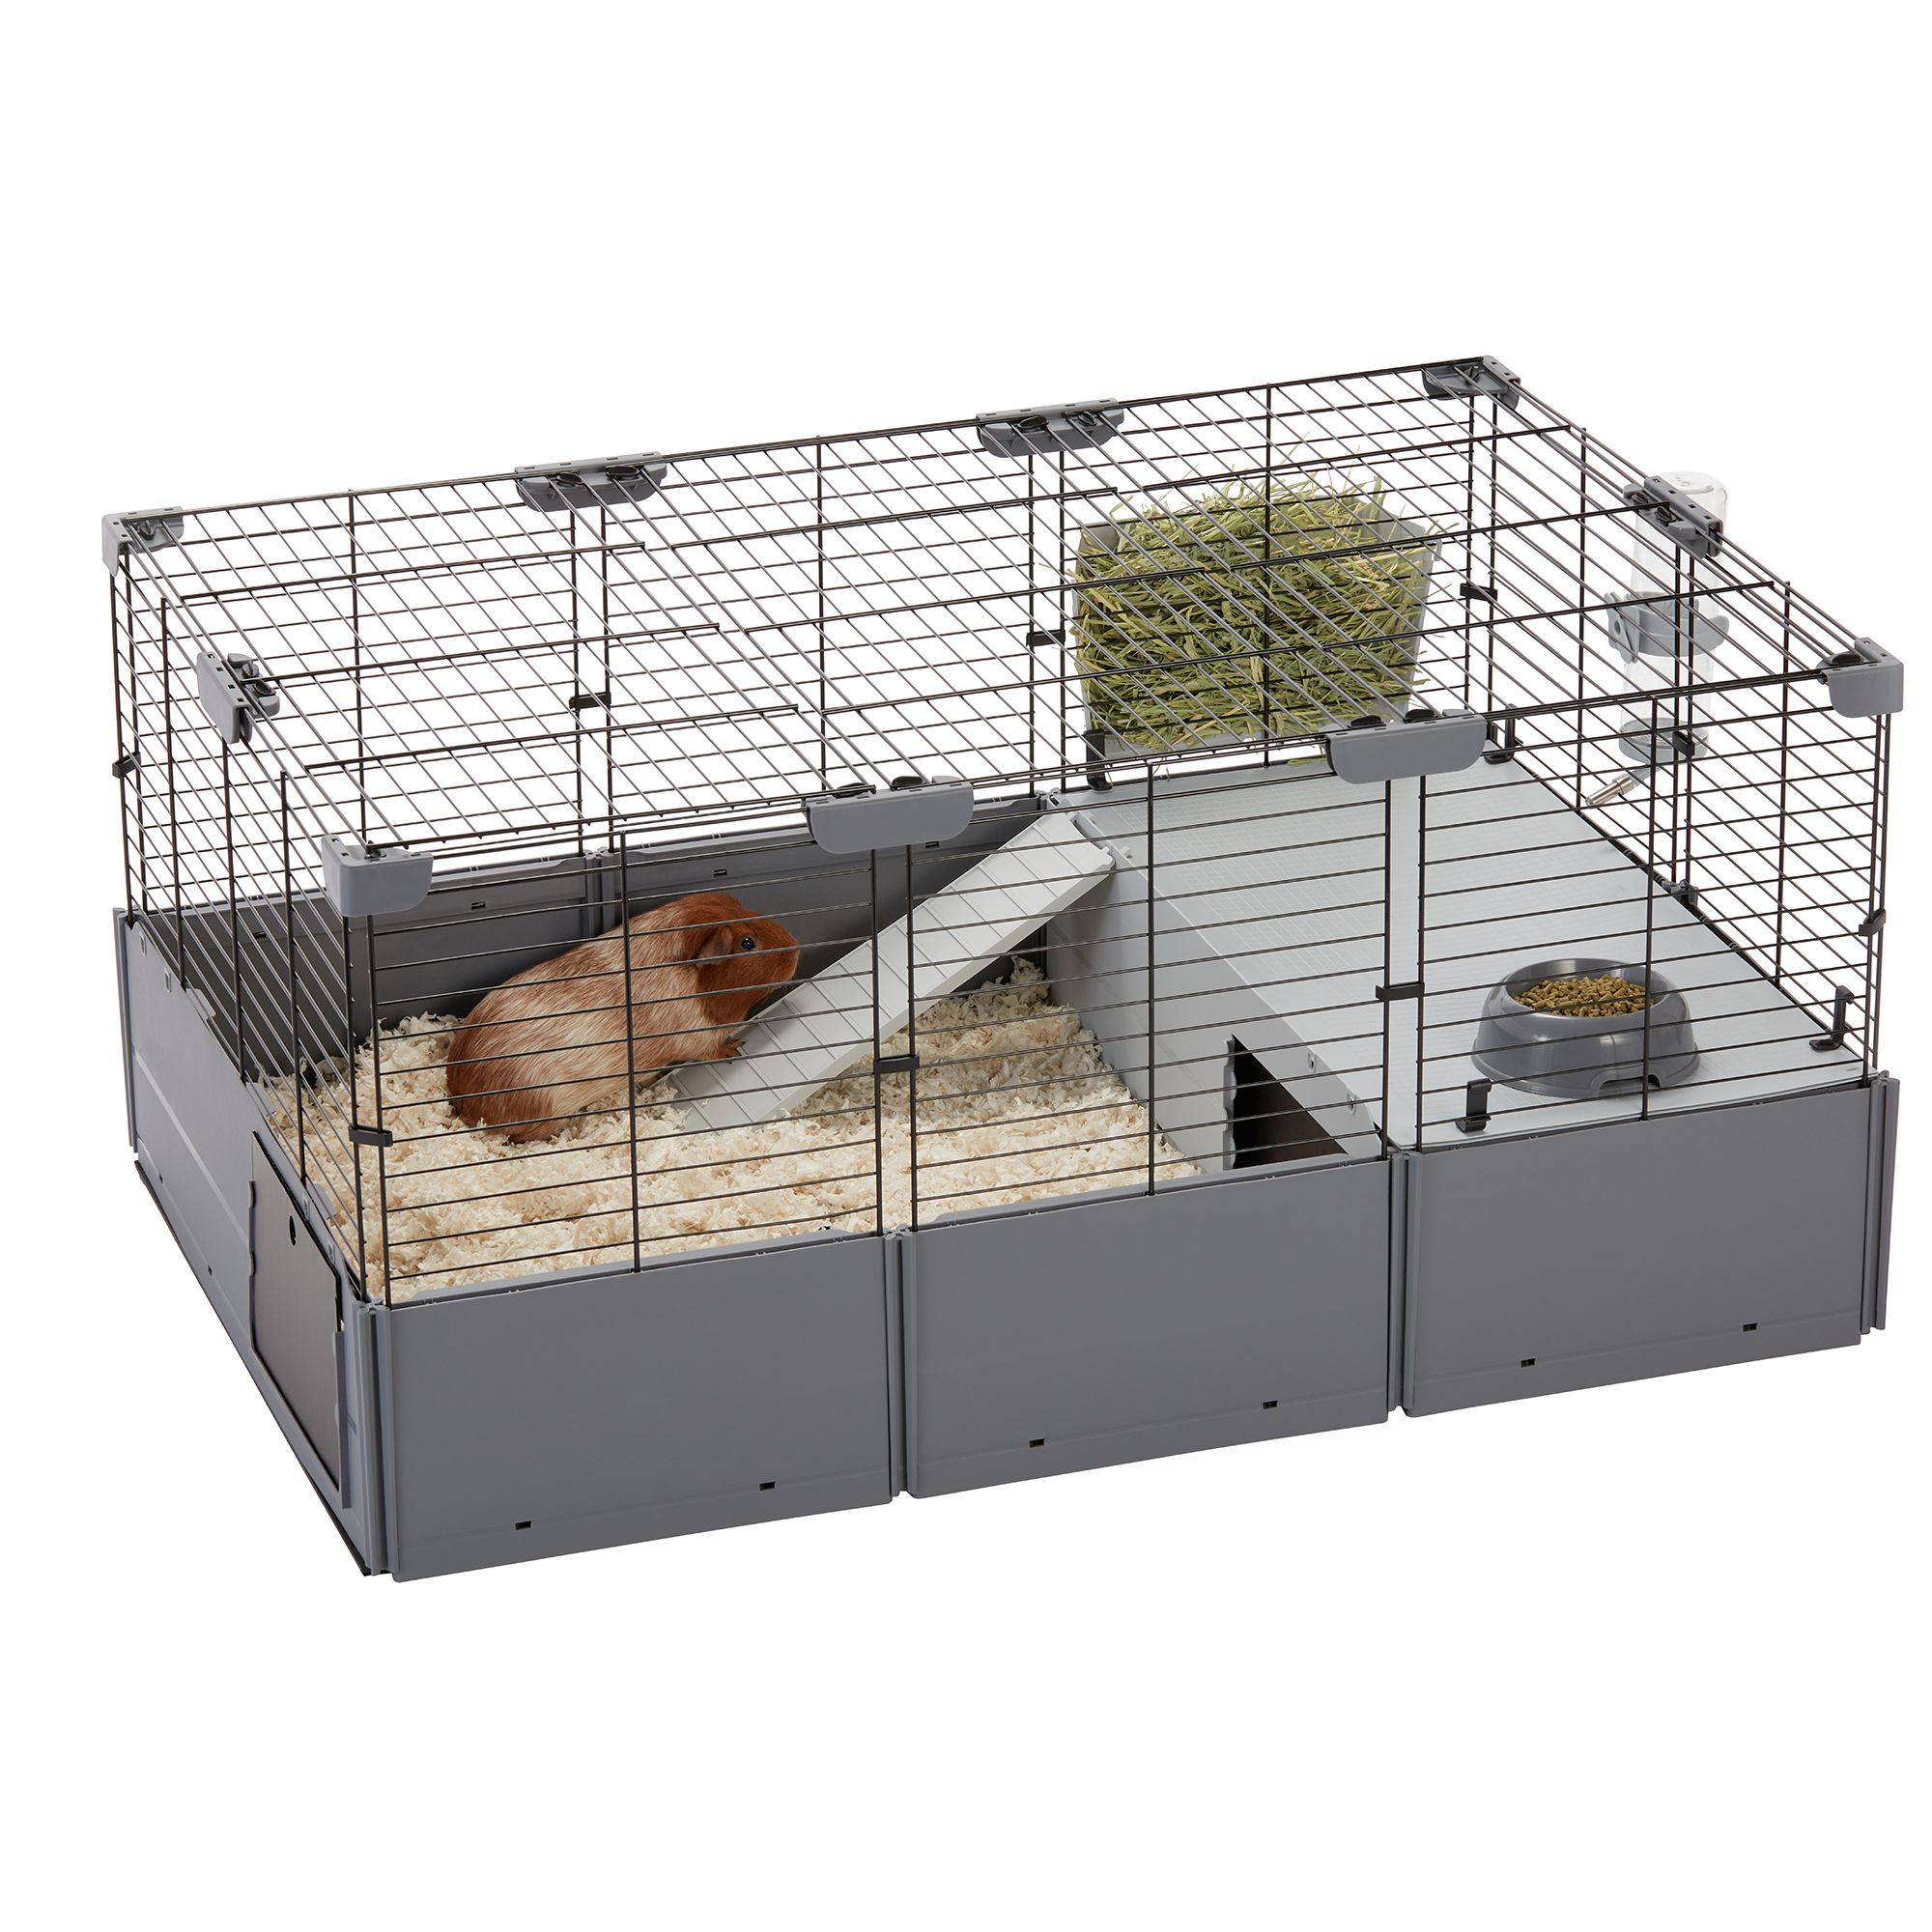 Full Cheeks, Customizable Small Pet Habitat - Includes Cage, Hideaway, Hay Feeder, Bowl, and Bot, Size: 41.6L x 27.5W 19.6H | PetSmart